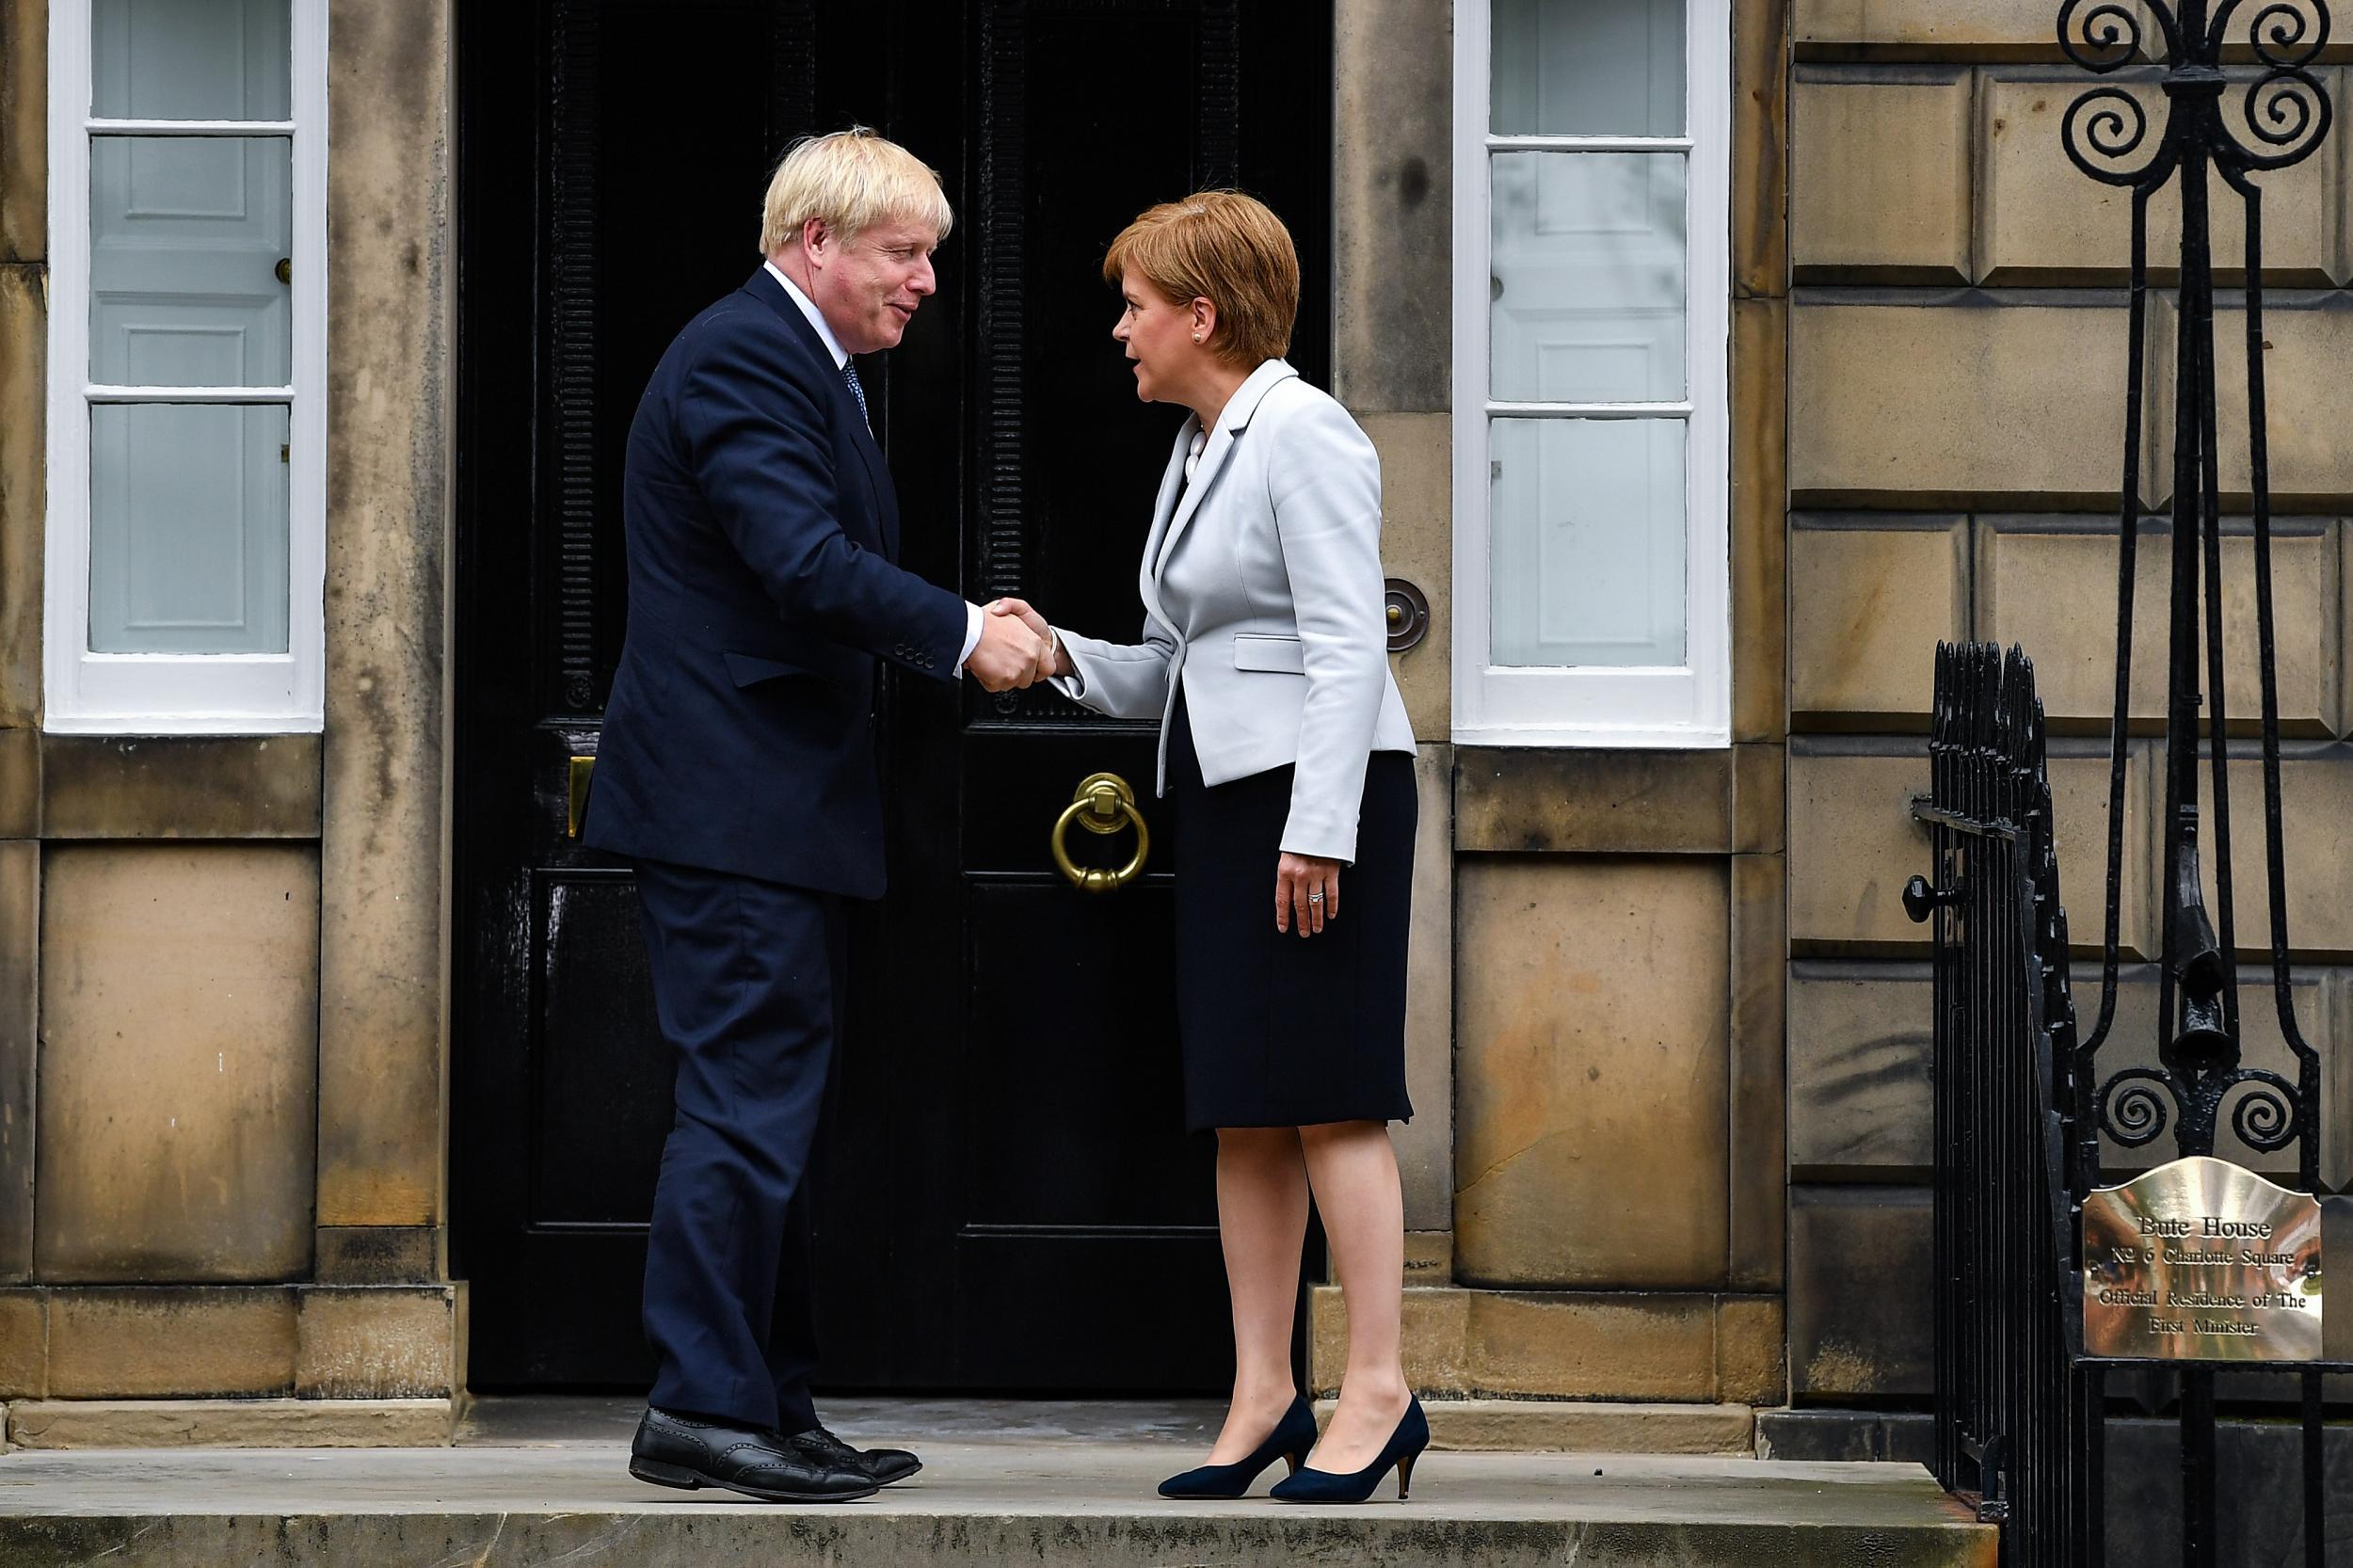 PM and Sturgeon: there have been clear signs of friction between No 10 and devolved administrations